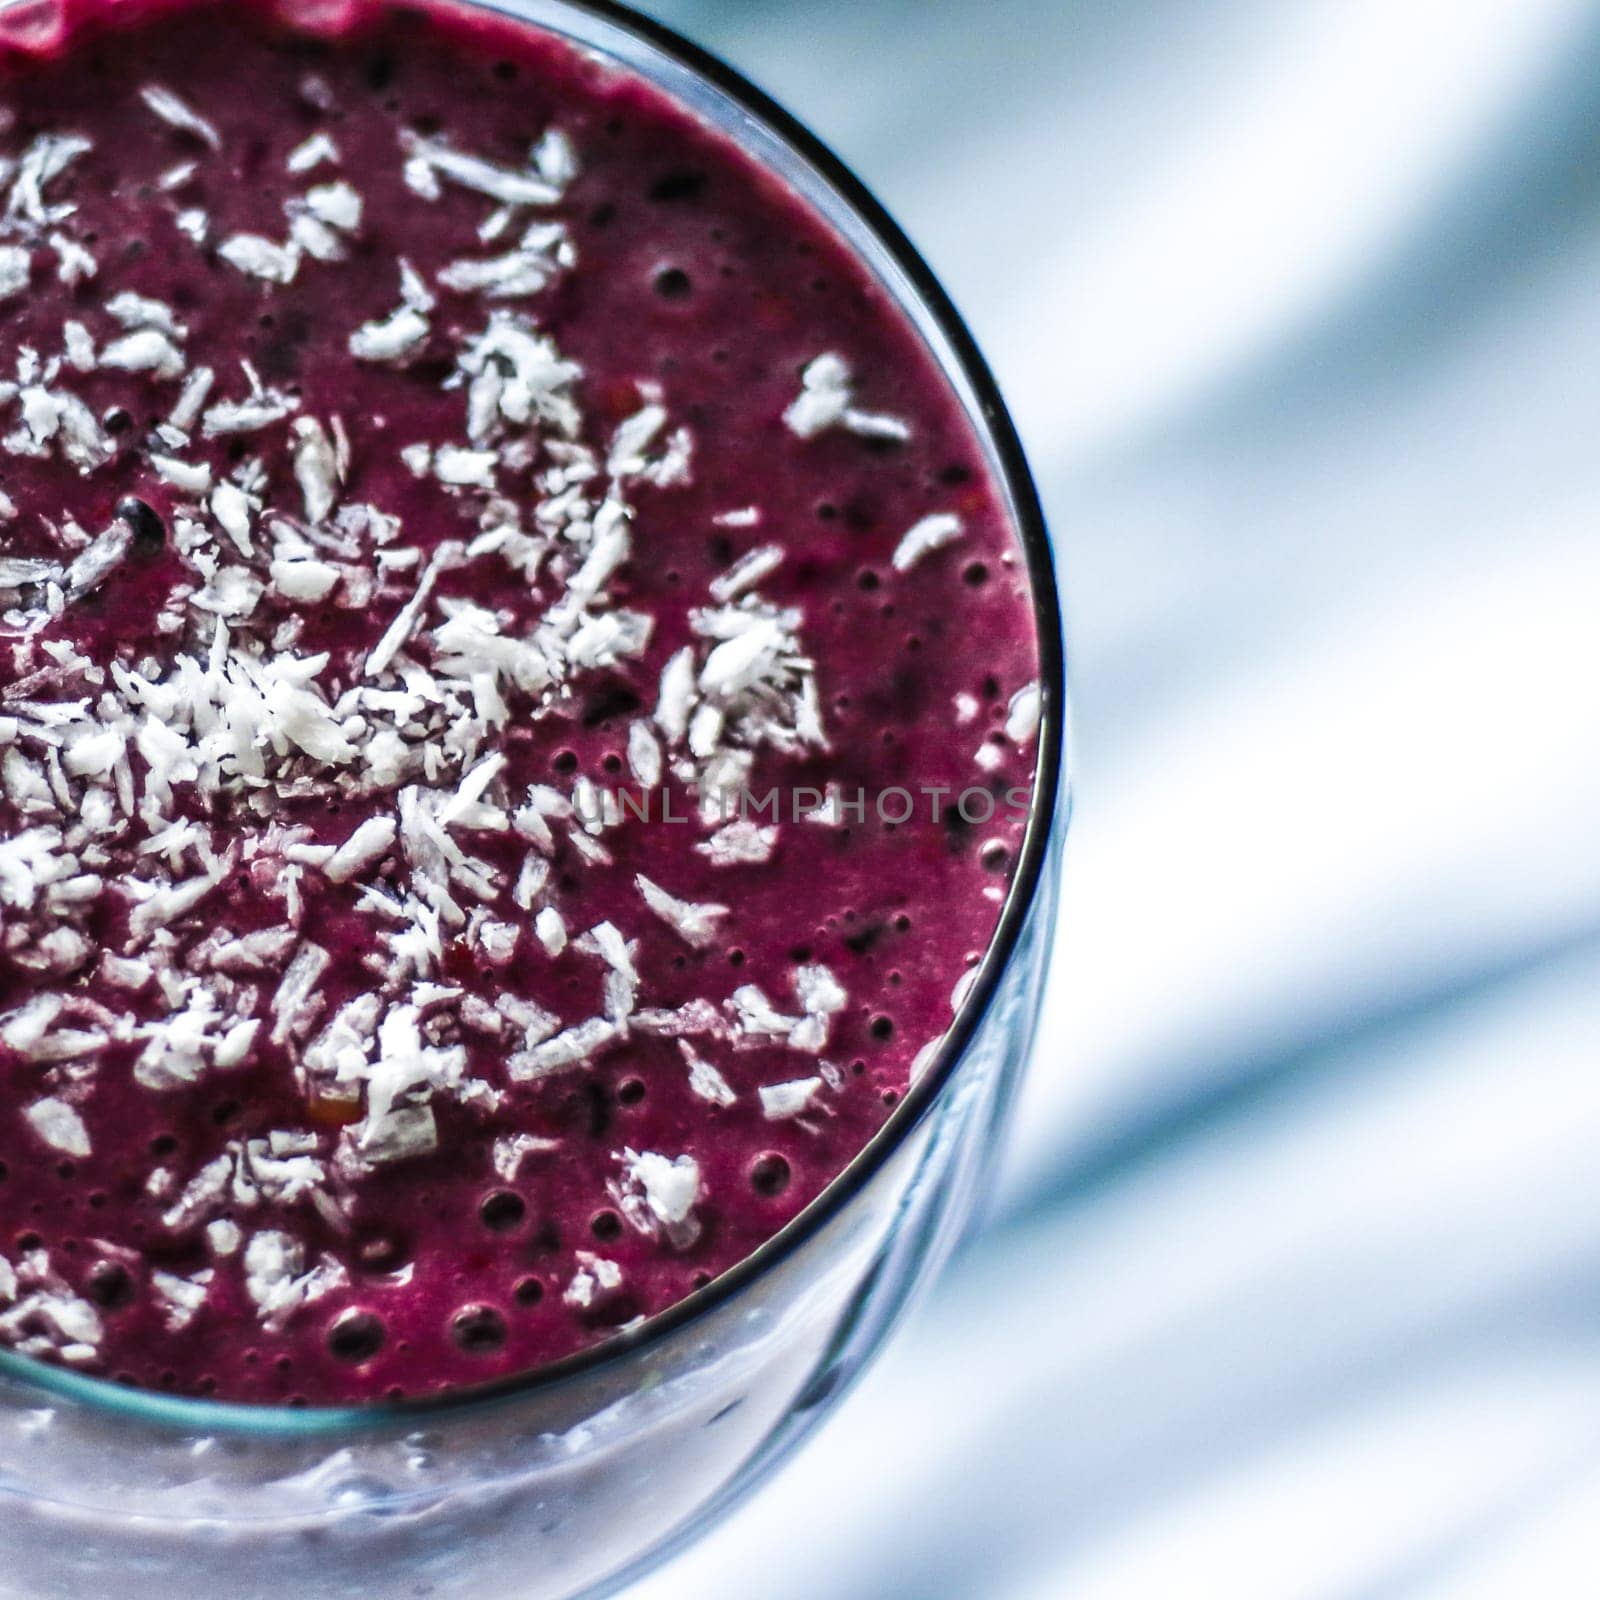 blueberry smoothie with coconut - healthy eating recipe styled concept, elegant visuals